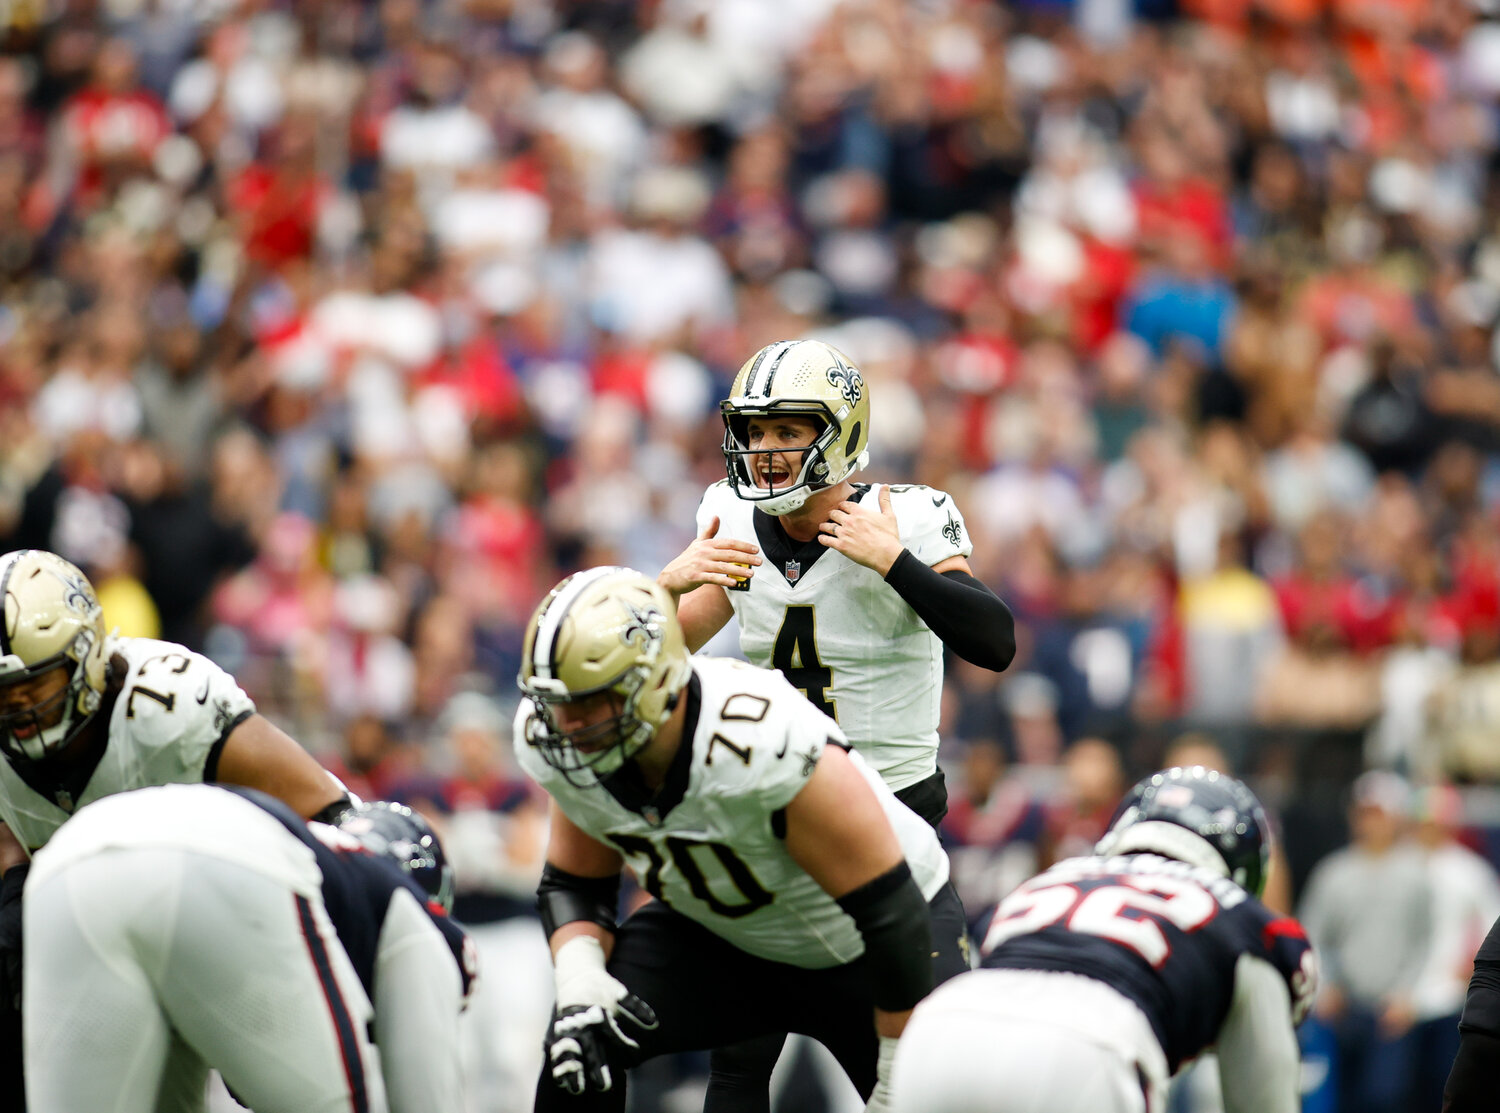 Saints quarterback Derek Carr (4) changes the play at the line of scrimmage on the Saints’ last-chance drive late in the fourth quarter of an NFL game between the Texans and the Saints on October 15, 2023 in Houston. The Texans won, 20-13.